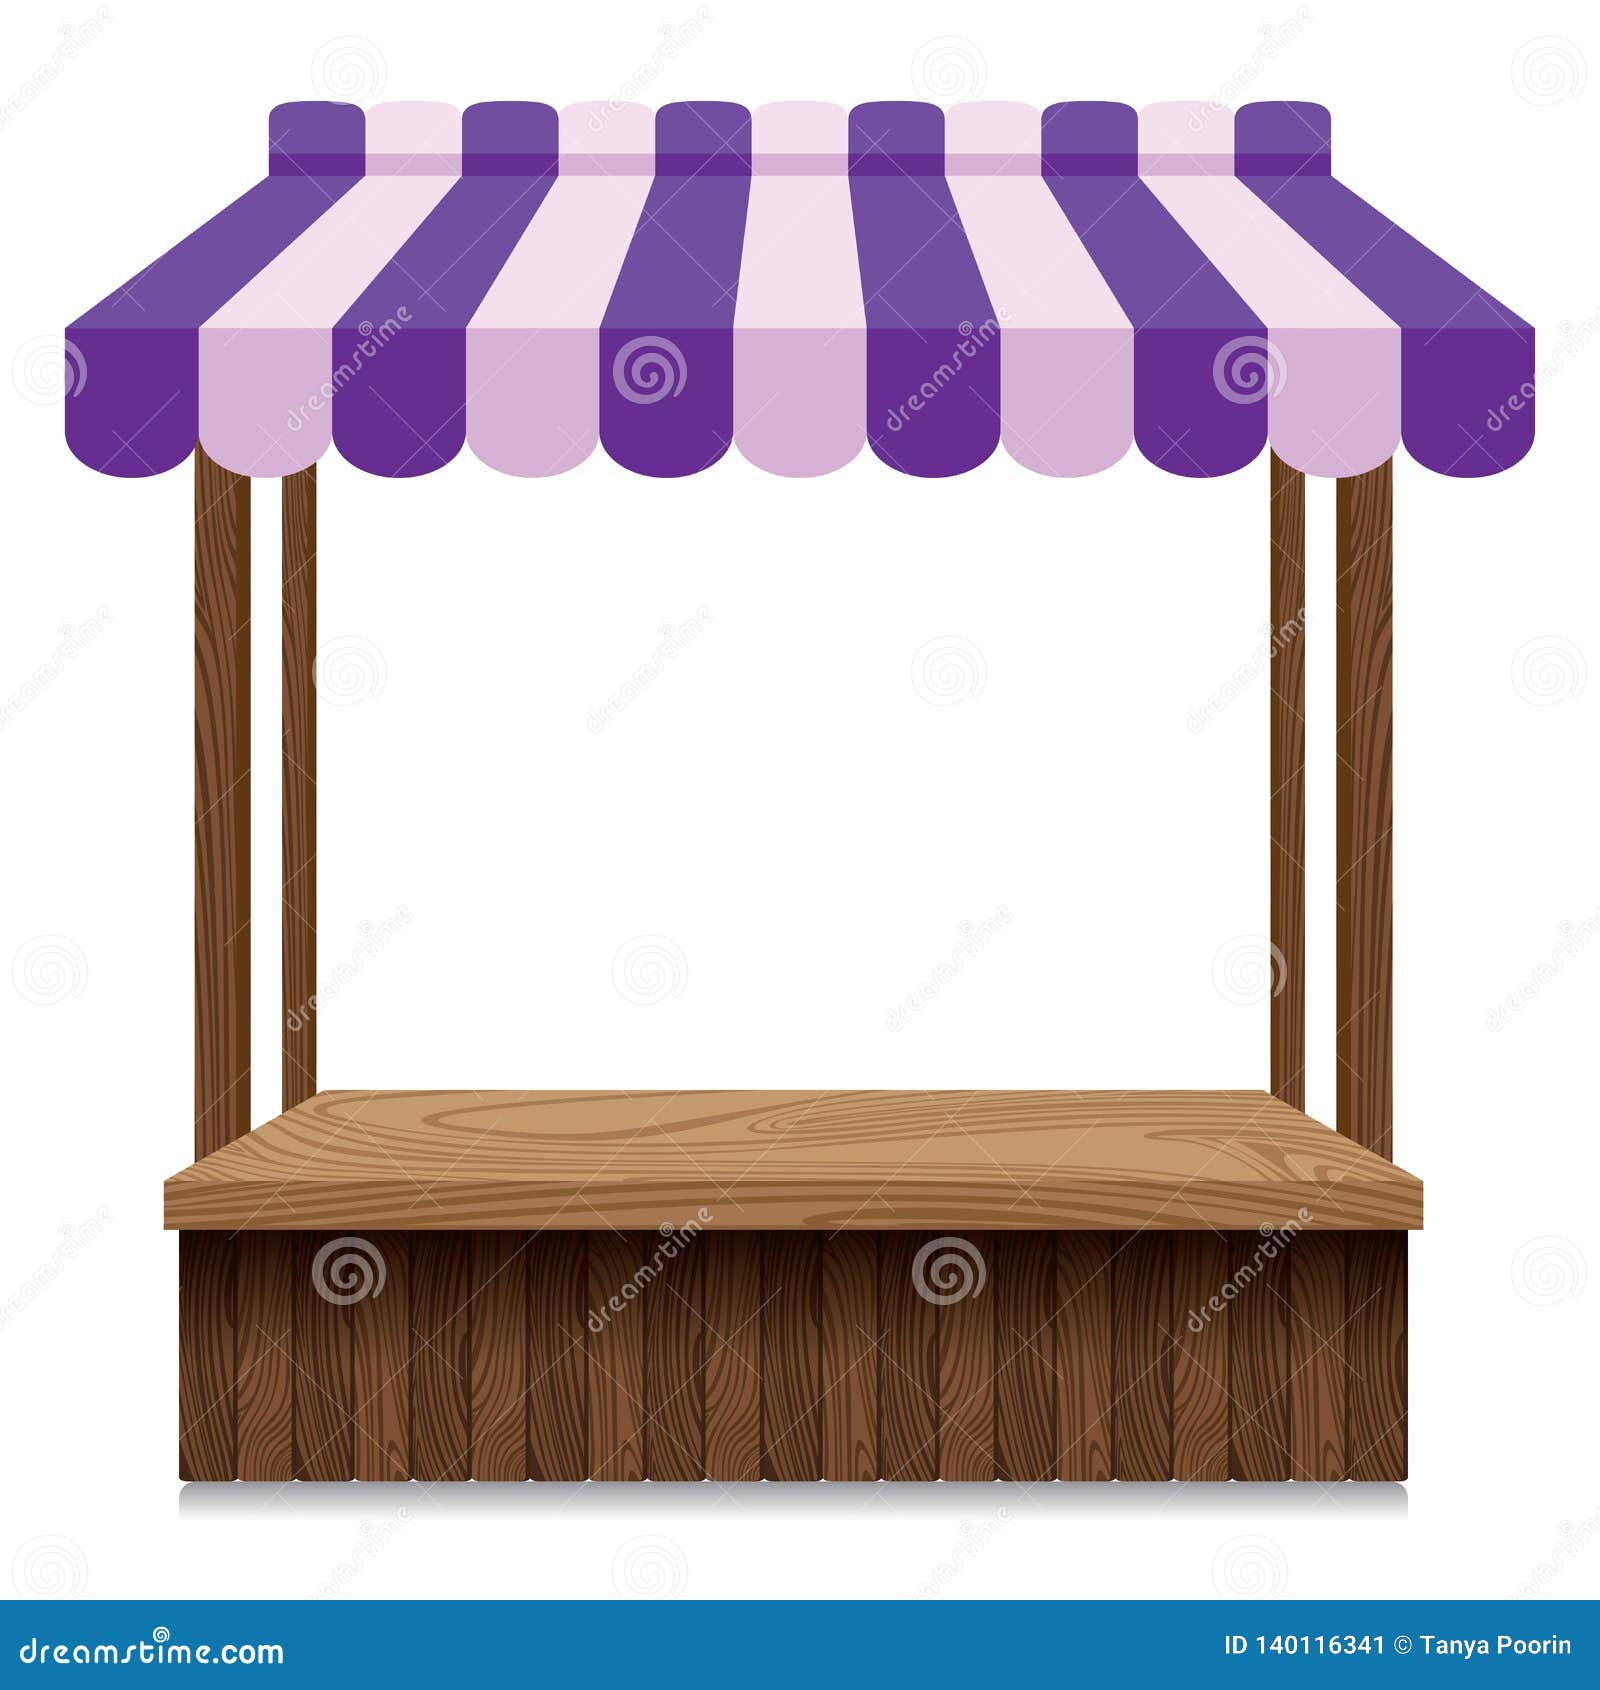 wooden market stall with purple and pink awning.